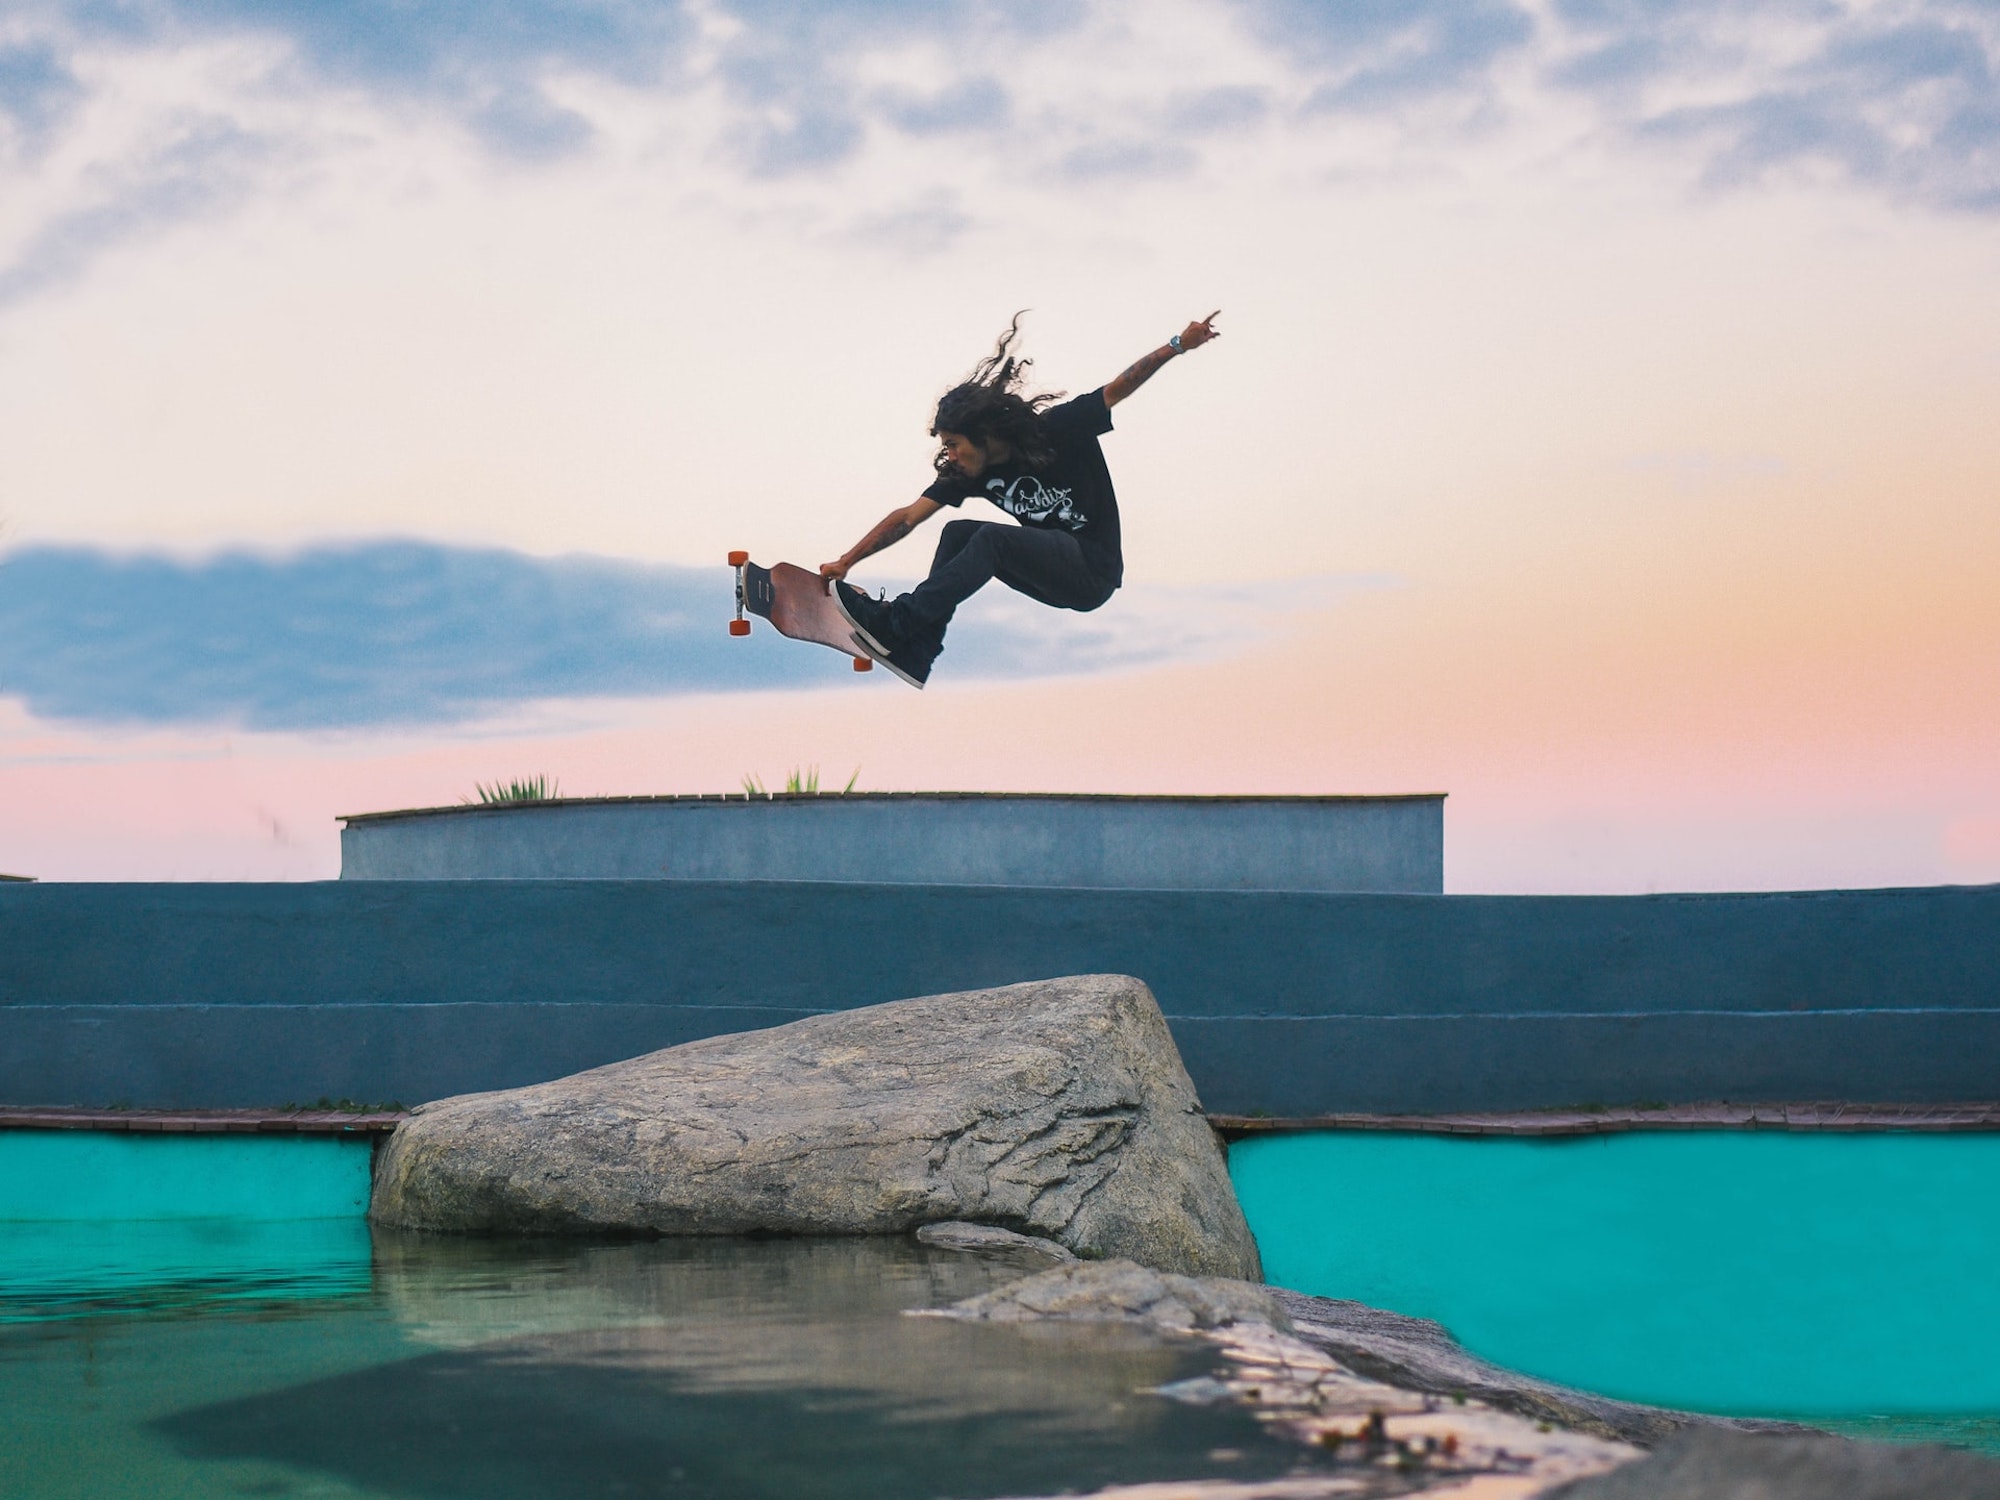 Skateboarder with long hair and black clothes doing a trick over a rock next to the sea green ocean